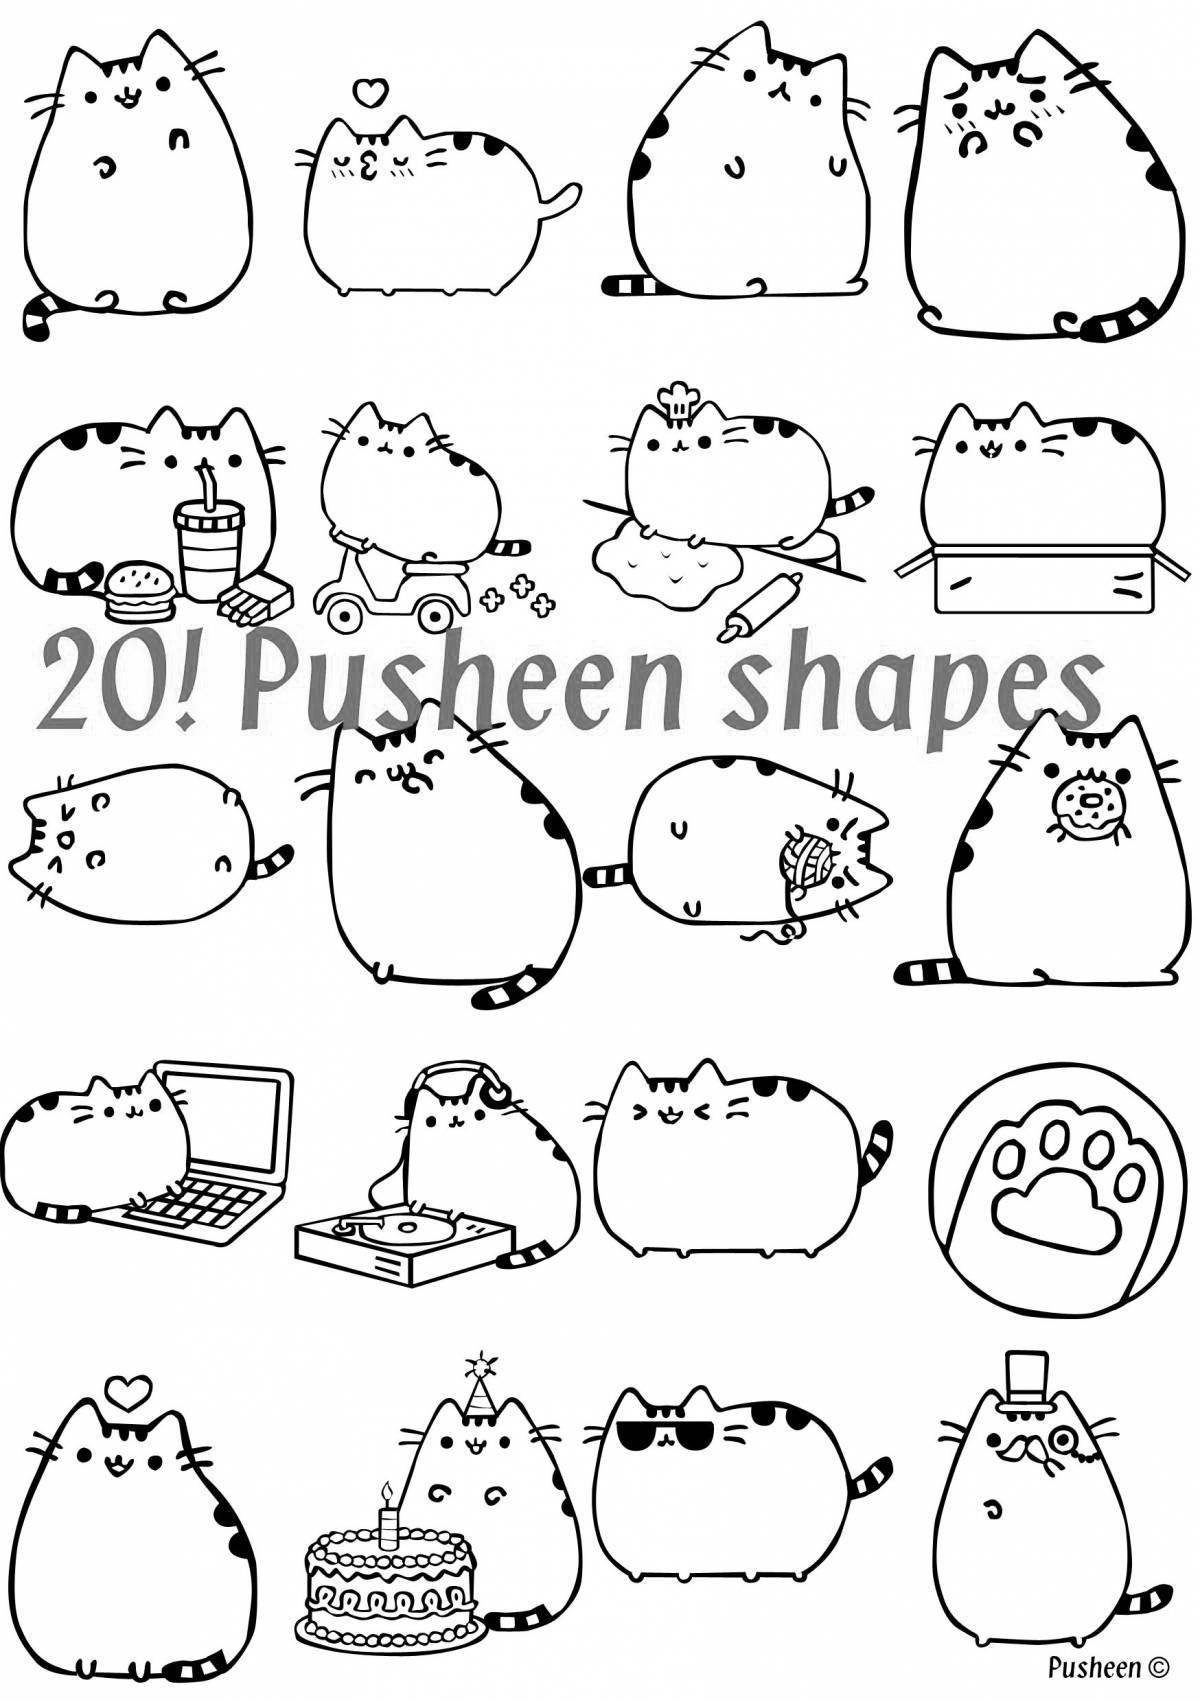 Adorable pusheen sticker coloring page